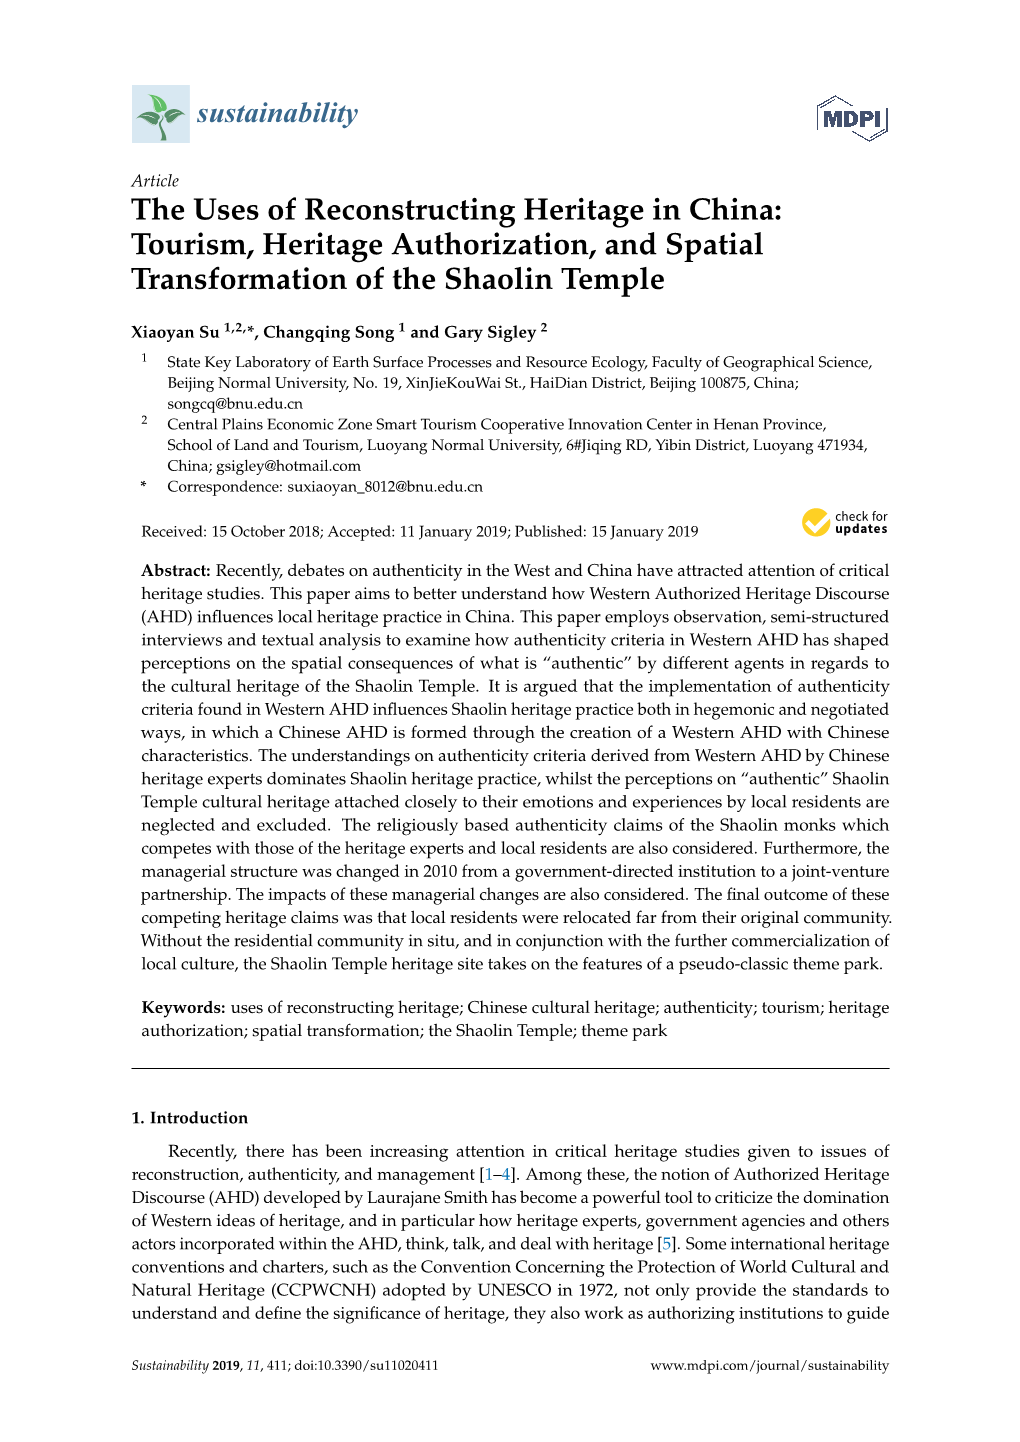 Tourism, Heritage Authorization, and Spatial Transformation of the Shaolin Temple